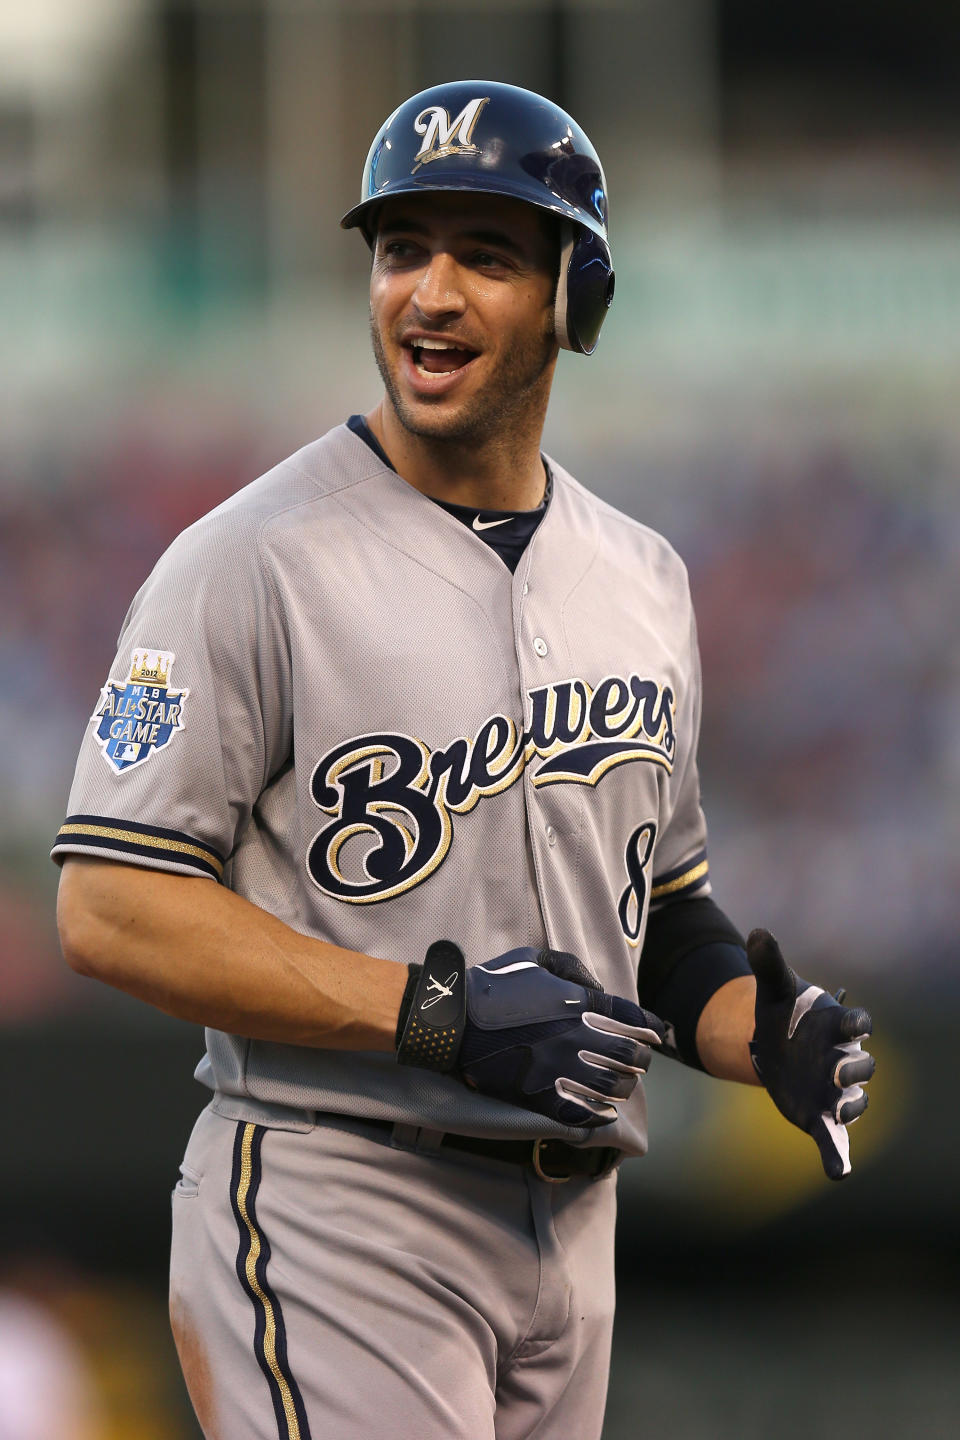 KANSAS CITY, MO - JULY 10: National League All-Star Ryan Braun #8 of the Milwaukee Brewers reacts after hitting a triple in the fourth inning during the 83rd MLB All-Star Game at Kauffman Stadium on July 10, 2012 in Kansas City, Missouri. (Photo by Jonathan Daniel/Getty Images)